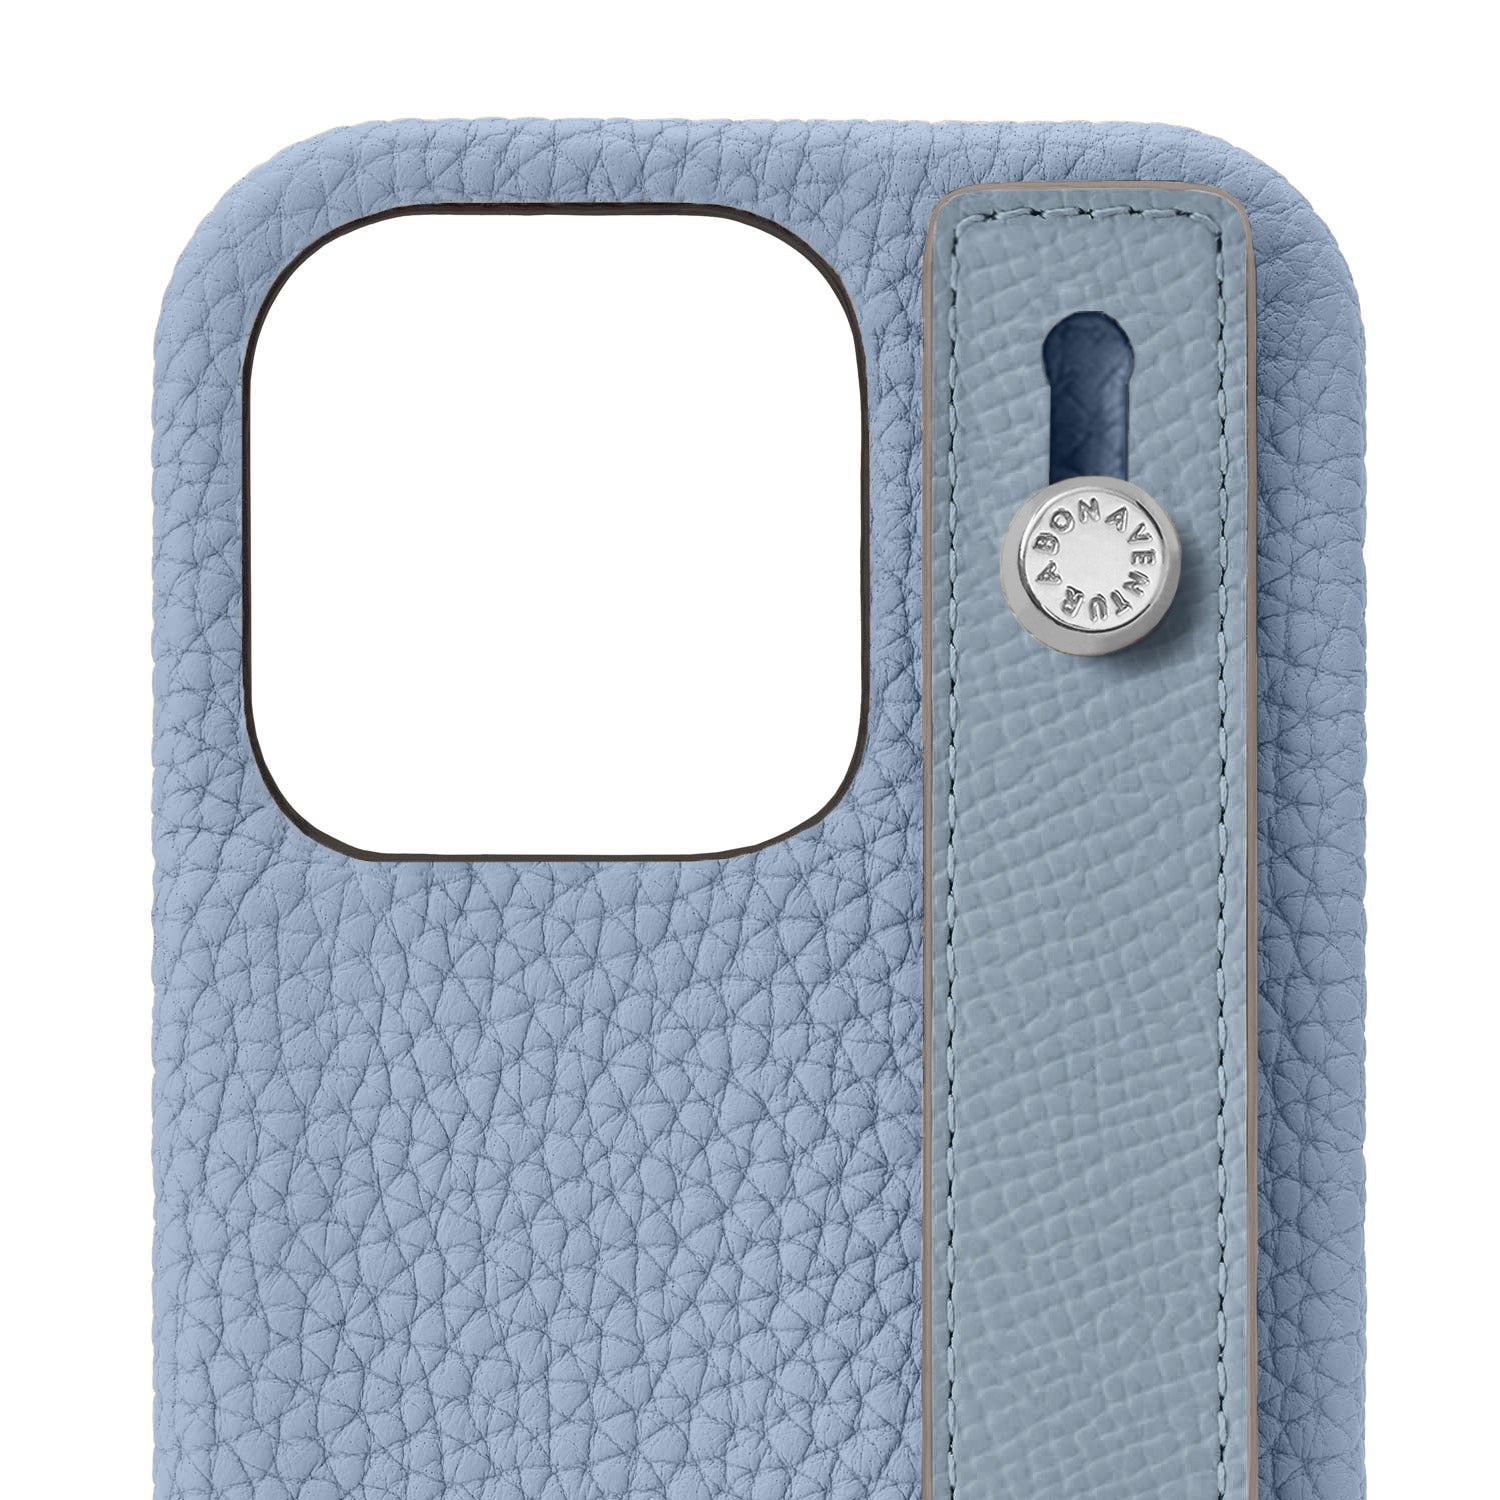 (iPhone 14 Pro Max) Back cover case with handle, shrink leather